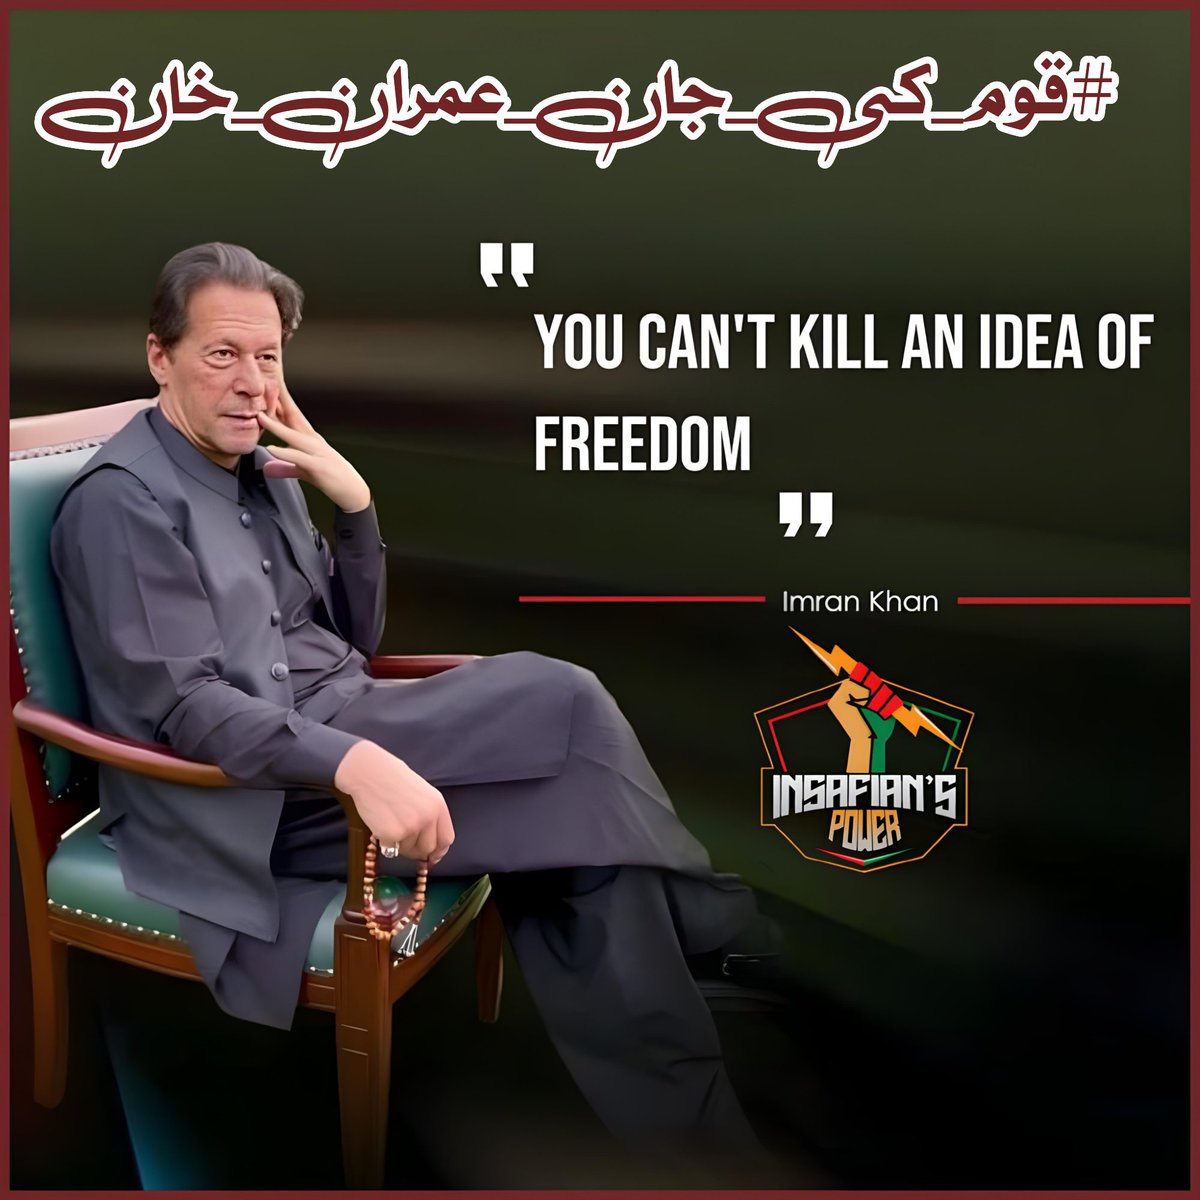 V wr raised wth certain values tht teach 2respect our females,protect kids,respect seniorcitizens &respect others'personal choices &beliefs,bt 4m past 18months,living in an immoral&valueless society wth 0 tolerance 4certain SchoolofThought, hypocrisy 🤔
#قوم_کی_جان_عمران_خان